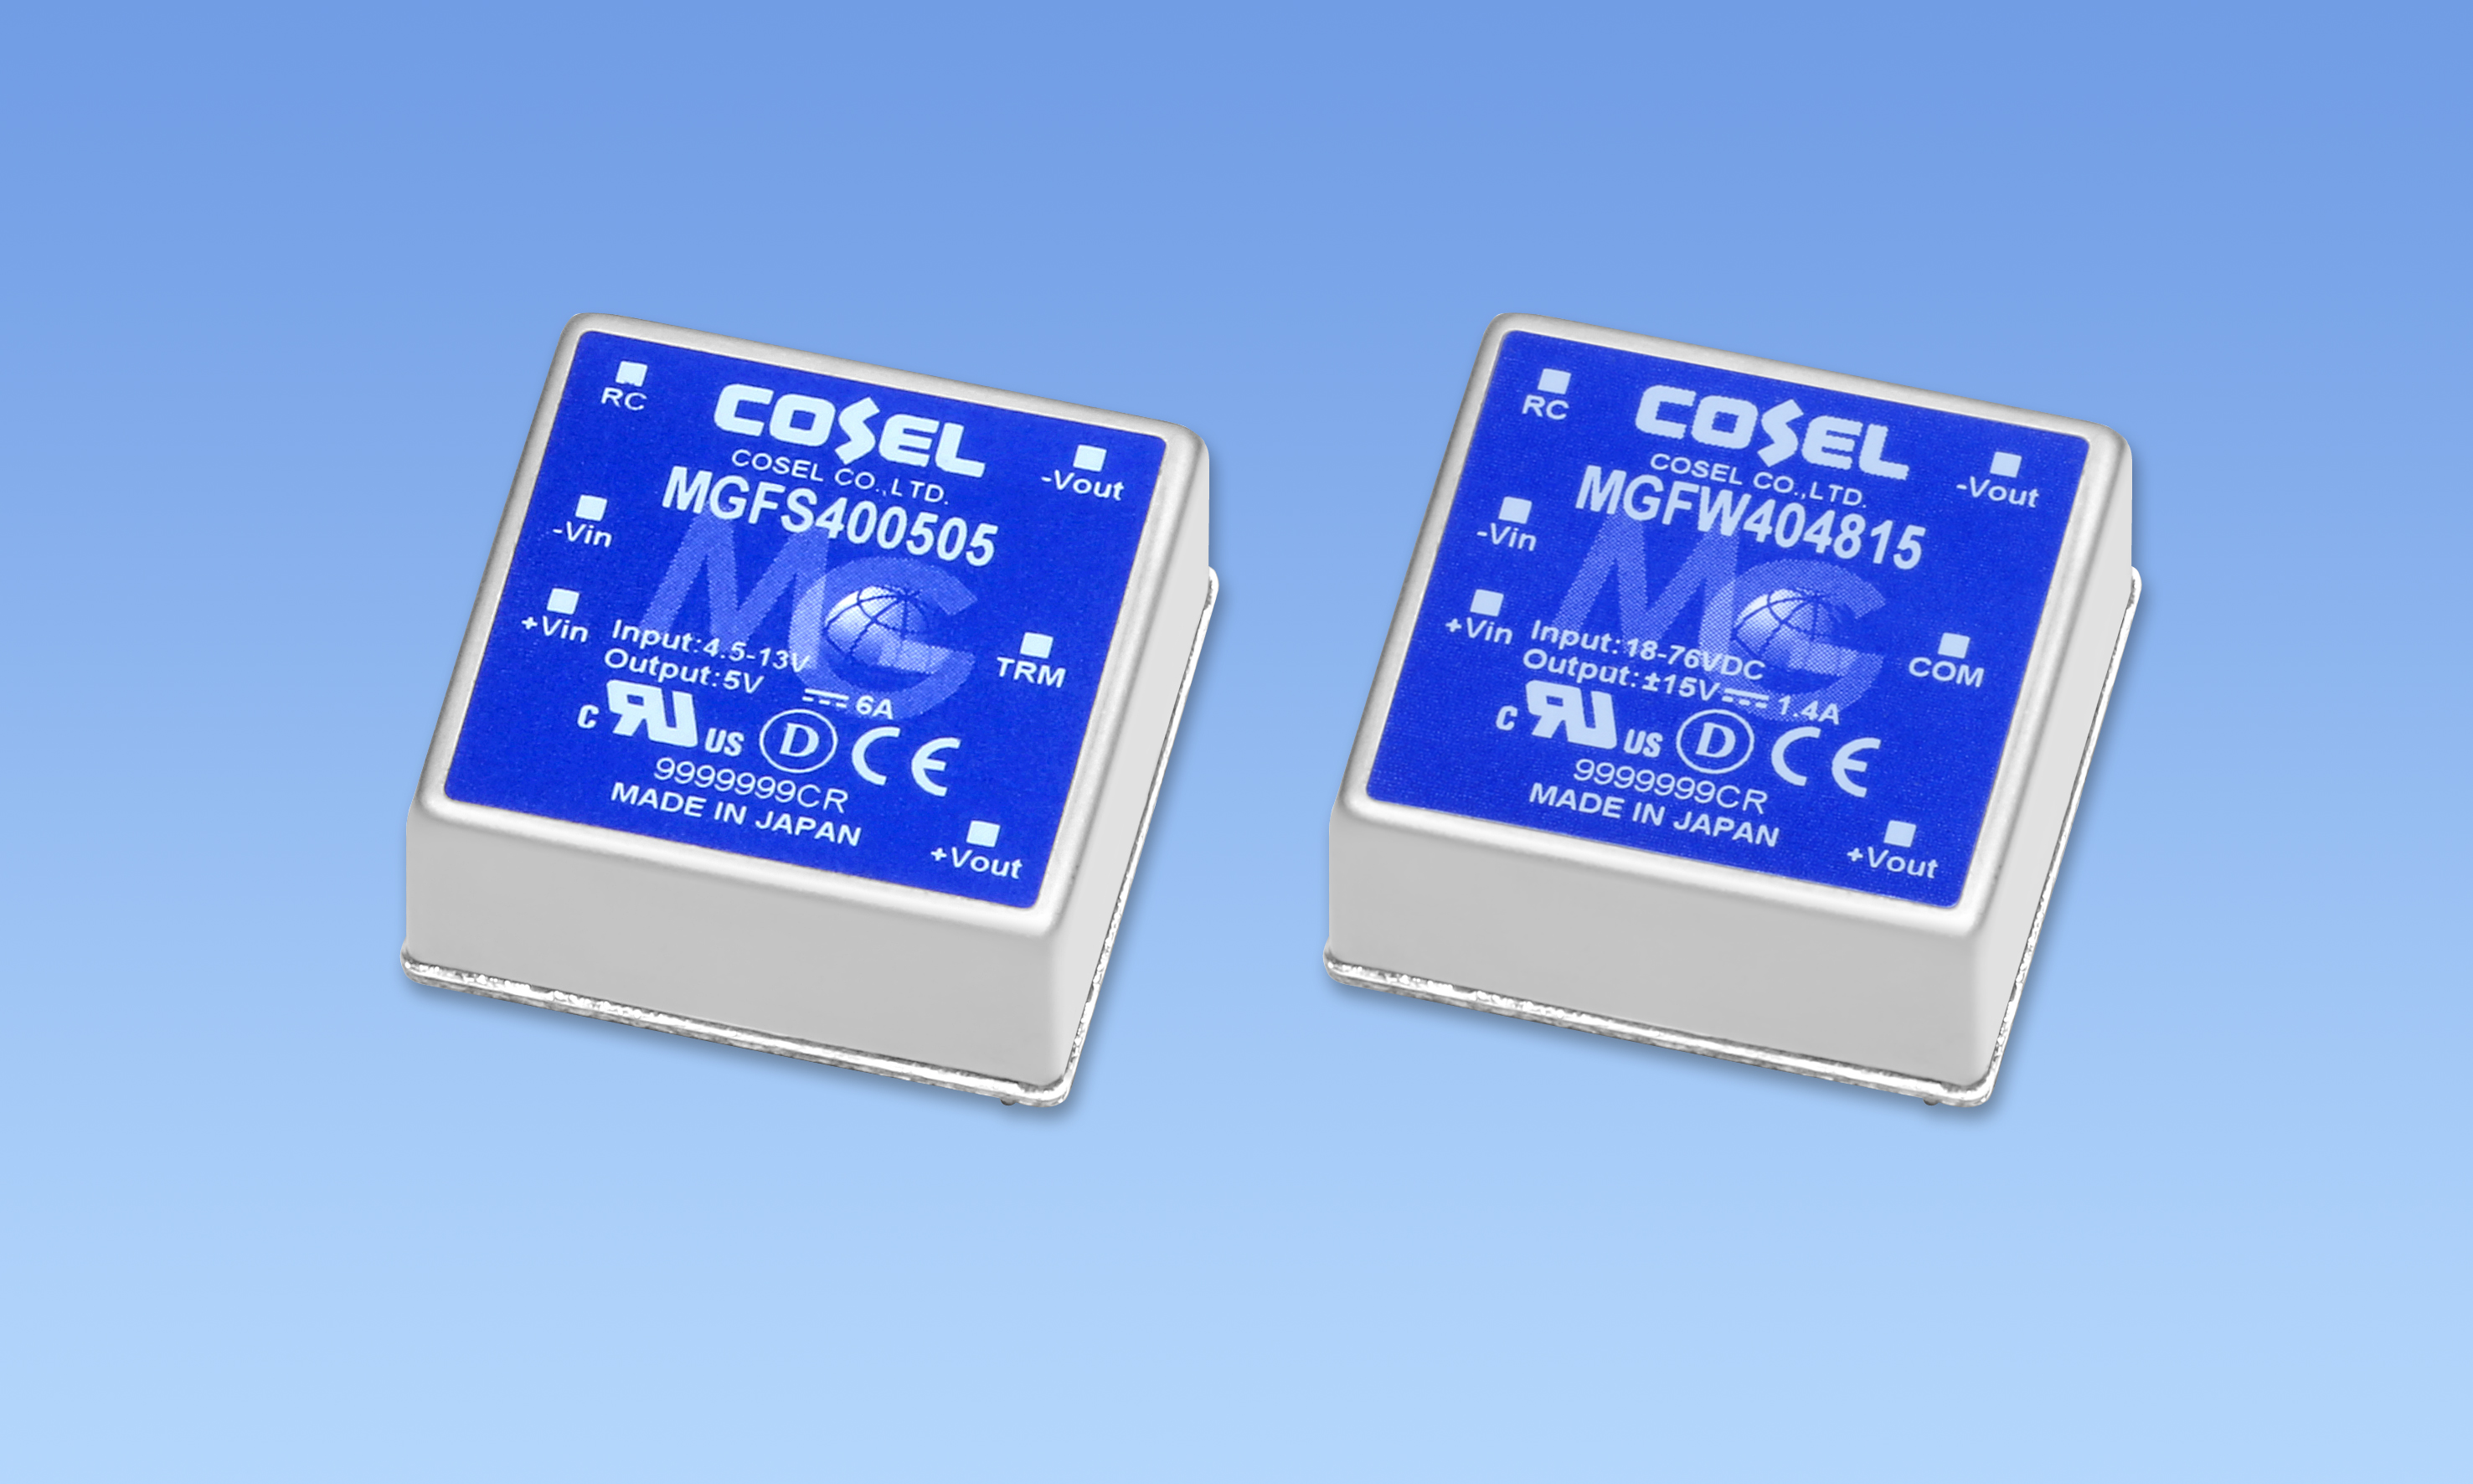 COSEL’s very high reliability 40W DC/DC converter for demanding applications offers 10 year warranty